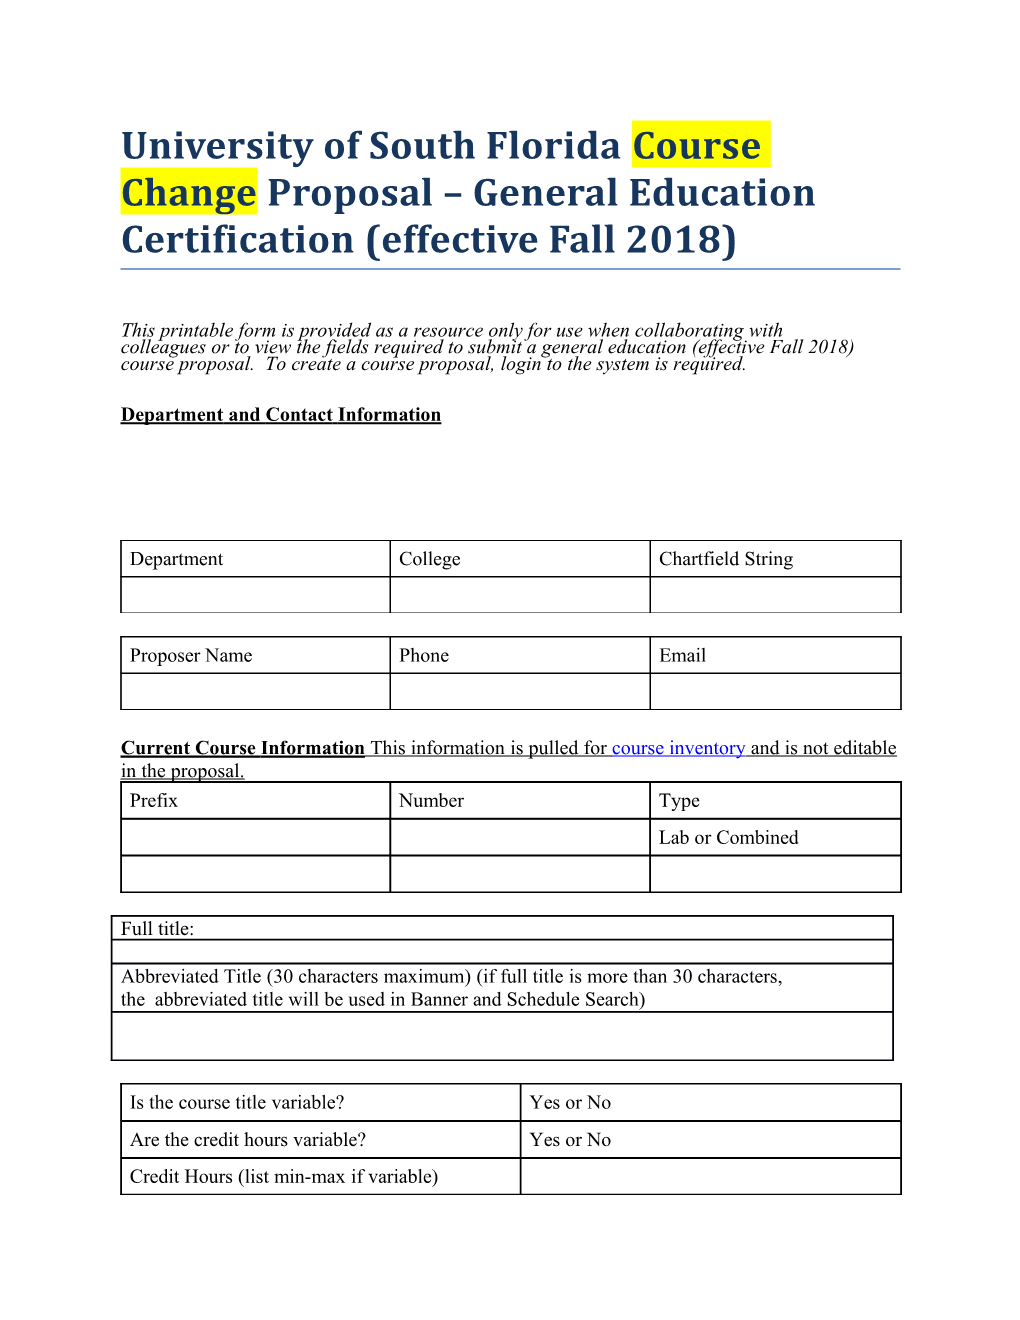 University of South Florida Course Change Proposal General Education Certification (Effective